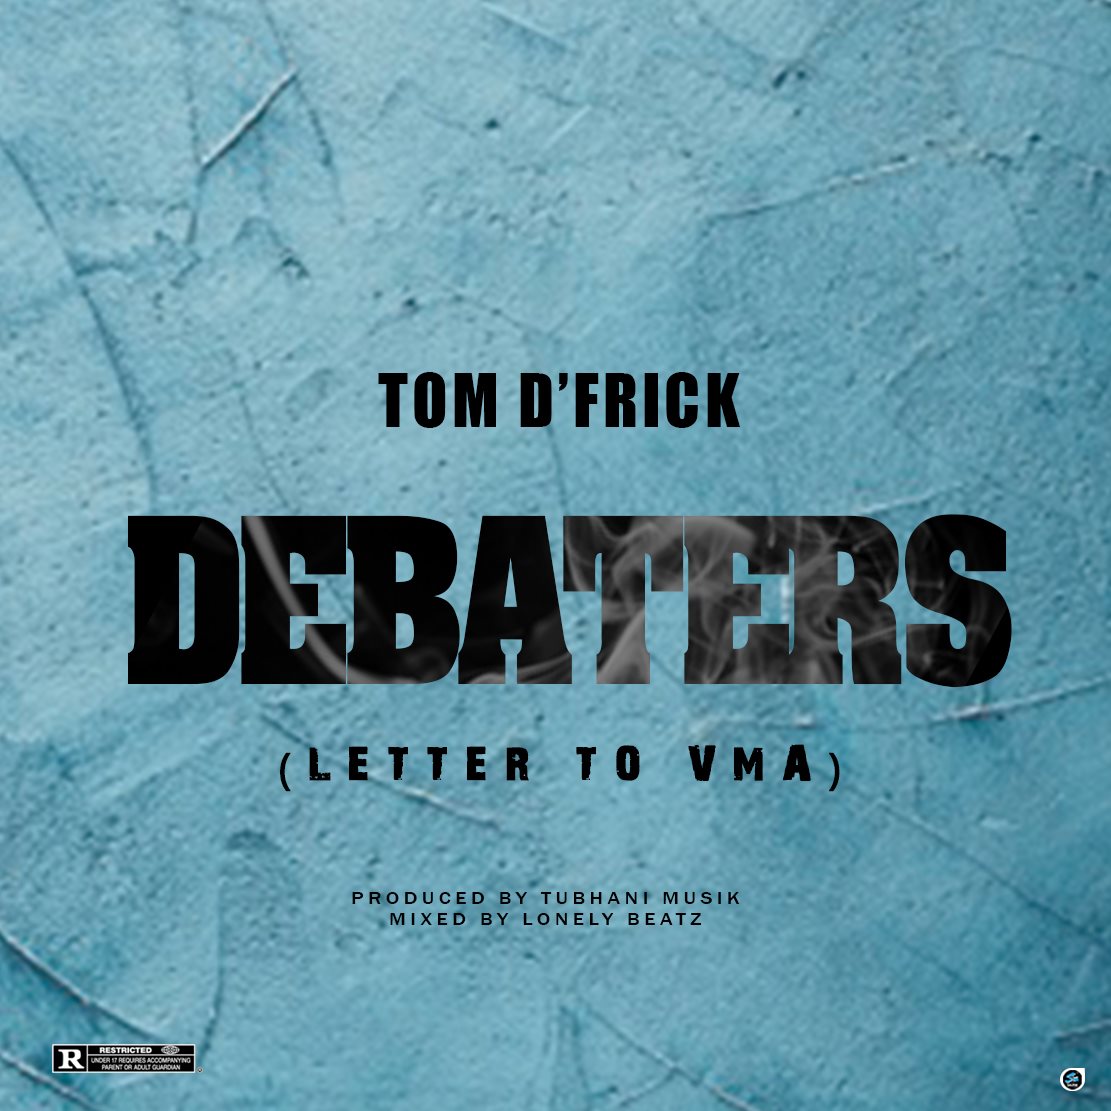 Tom D'Frick - Debaters (Letter 2 VMA) (Mixed by Lonely Beatz)